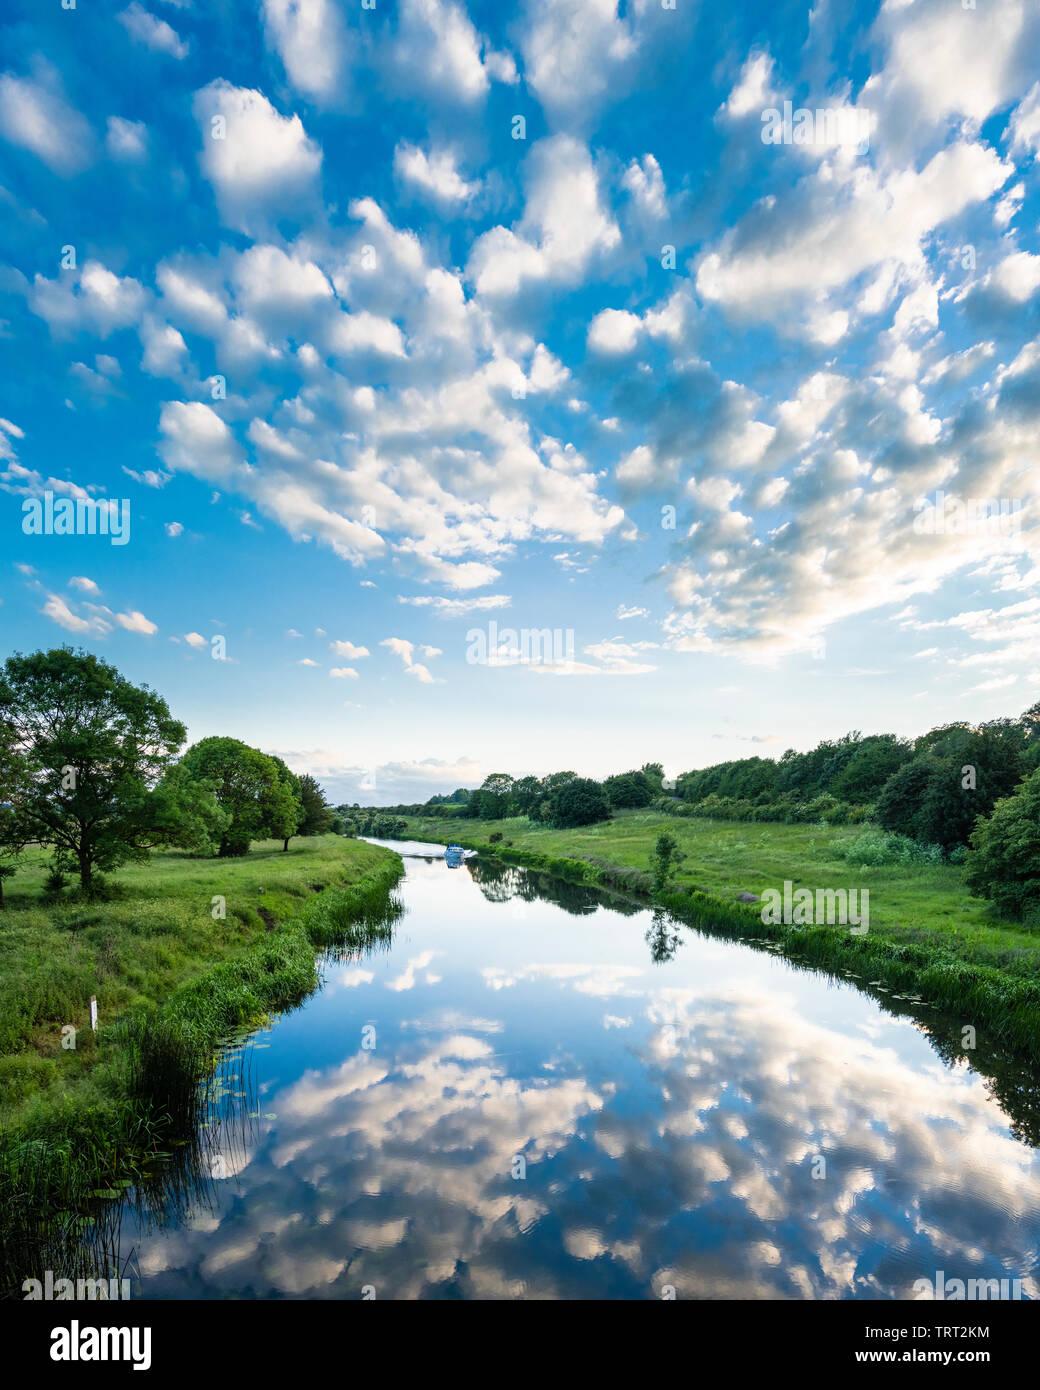 A peaceful June evening on the River Nene near Ferry Meadows, Peterborough, Cambridgeshire, with a mackerel sky reflected in the still water. Stock Photo